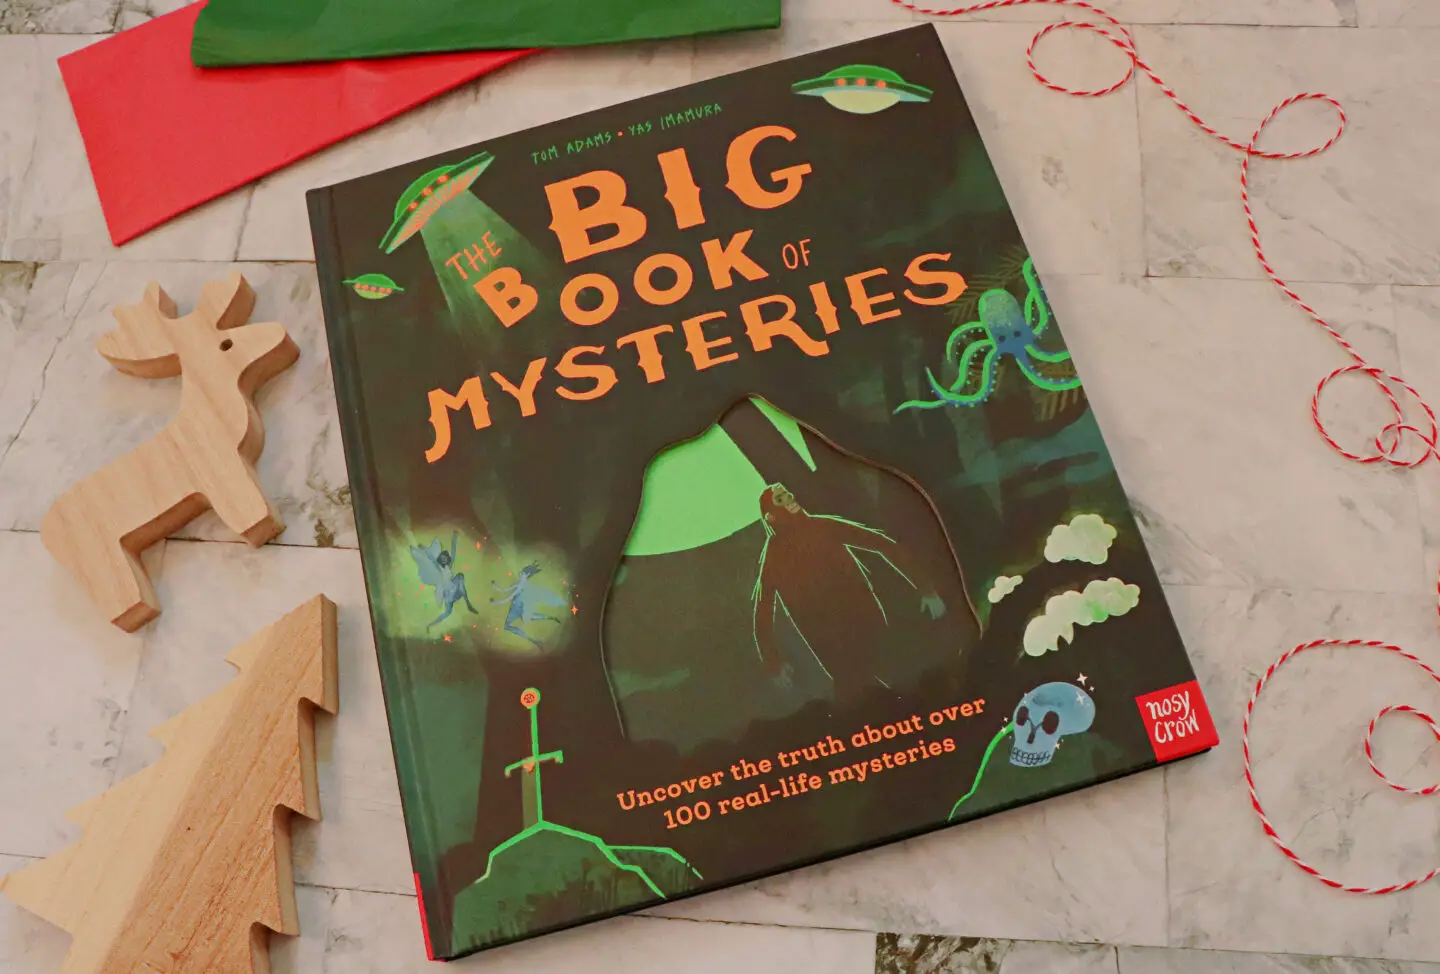 Big book of mysteries